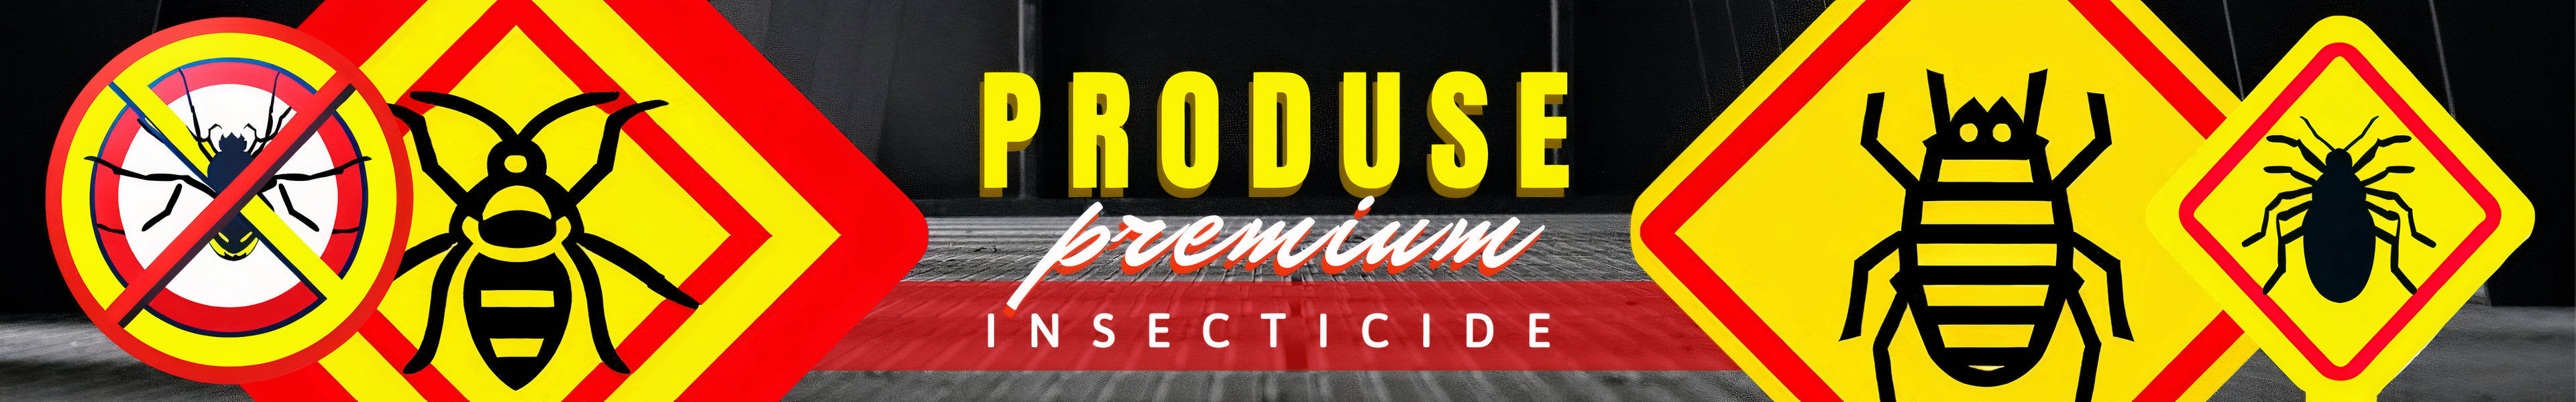 Produse Insecticide